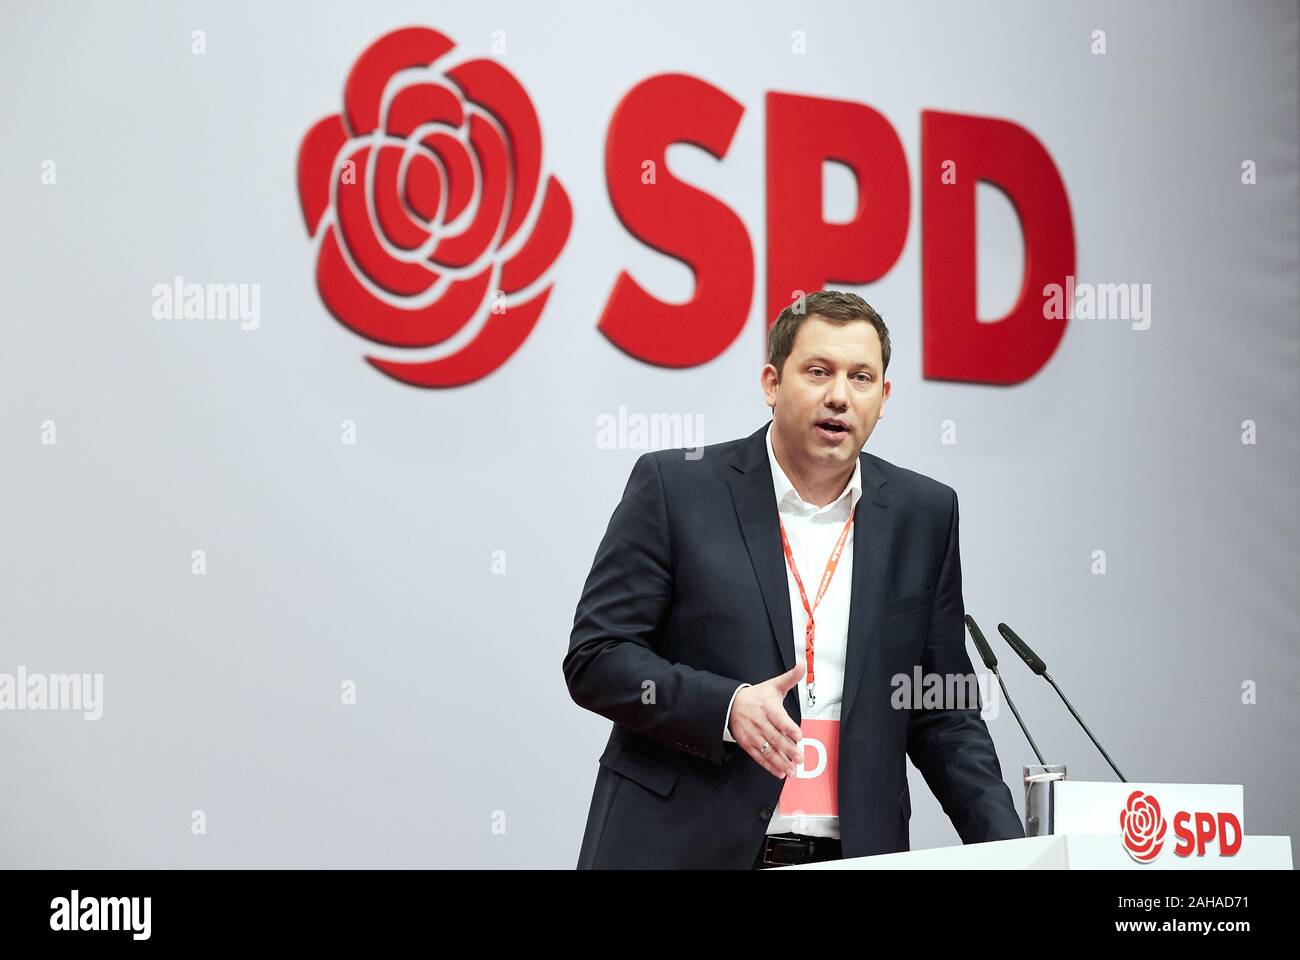 06.12.2019, Berlin, Berlin, Germany - Lars Klingbeil, Secretary-General of the SPD, on the podium with his speech at the opening of the Federal Party Stock Photo